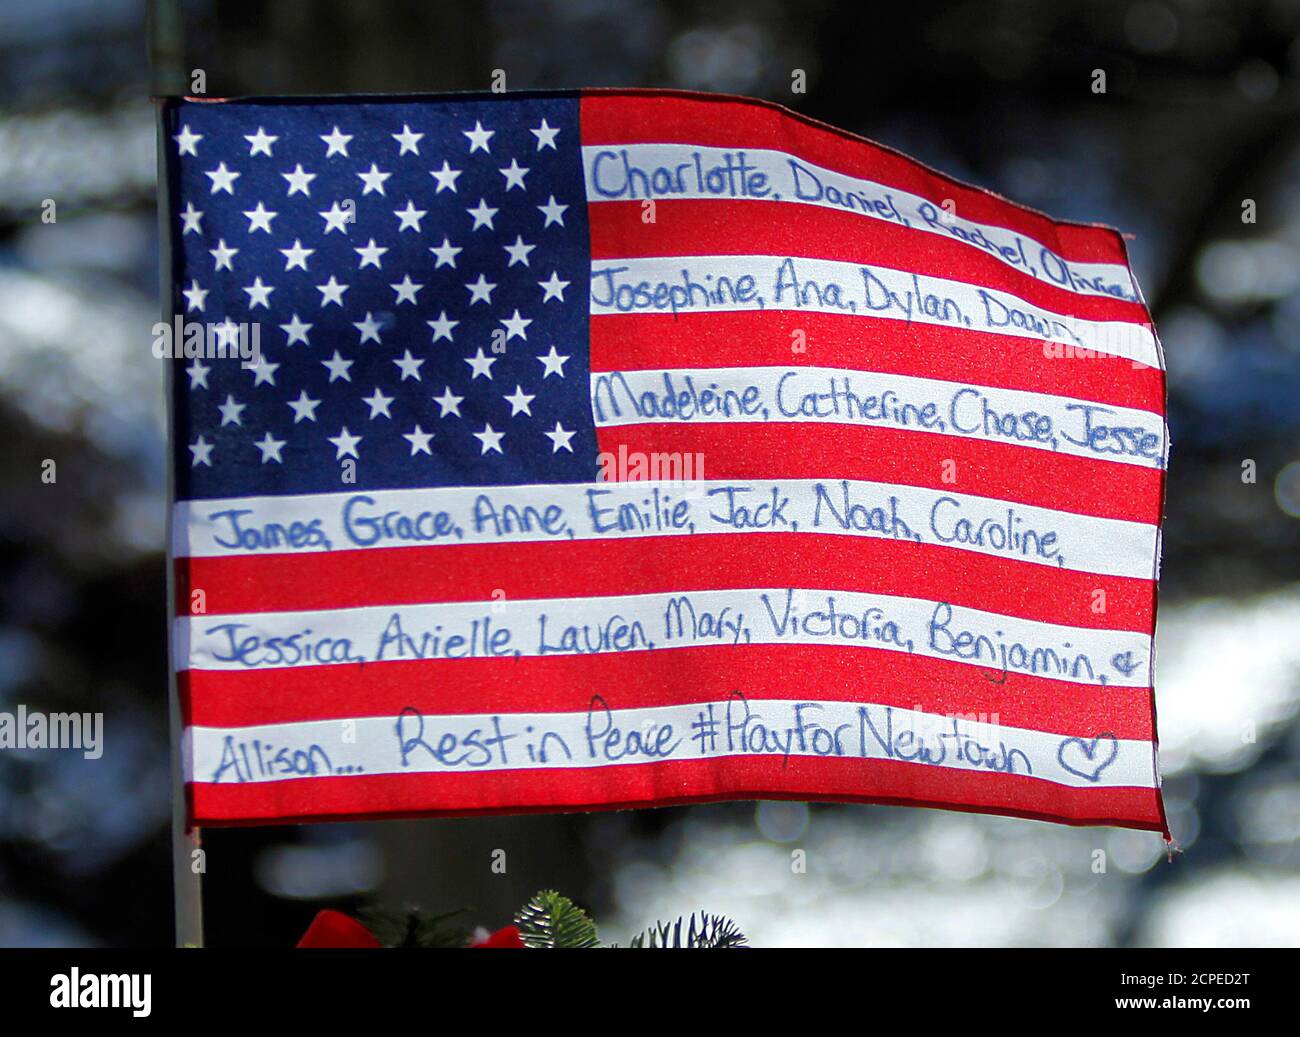 A flag that bears the names of the dead flies over a makeshift memorial in Sandy Hook after the December 14 shooting tragedy when a gunman shot dead 20 students and six adults at Sandy Hook Elementary, in Newtown, Connecticut, December 28, 2012    REUTERS/Carlo Allegri  (UNITED STATES - Tags: CRIME LAW EDUCATION) Stock Photo